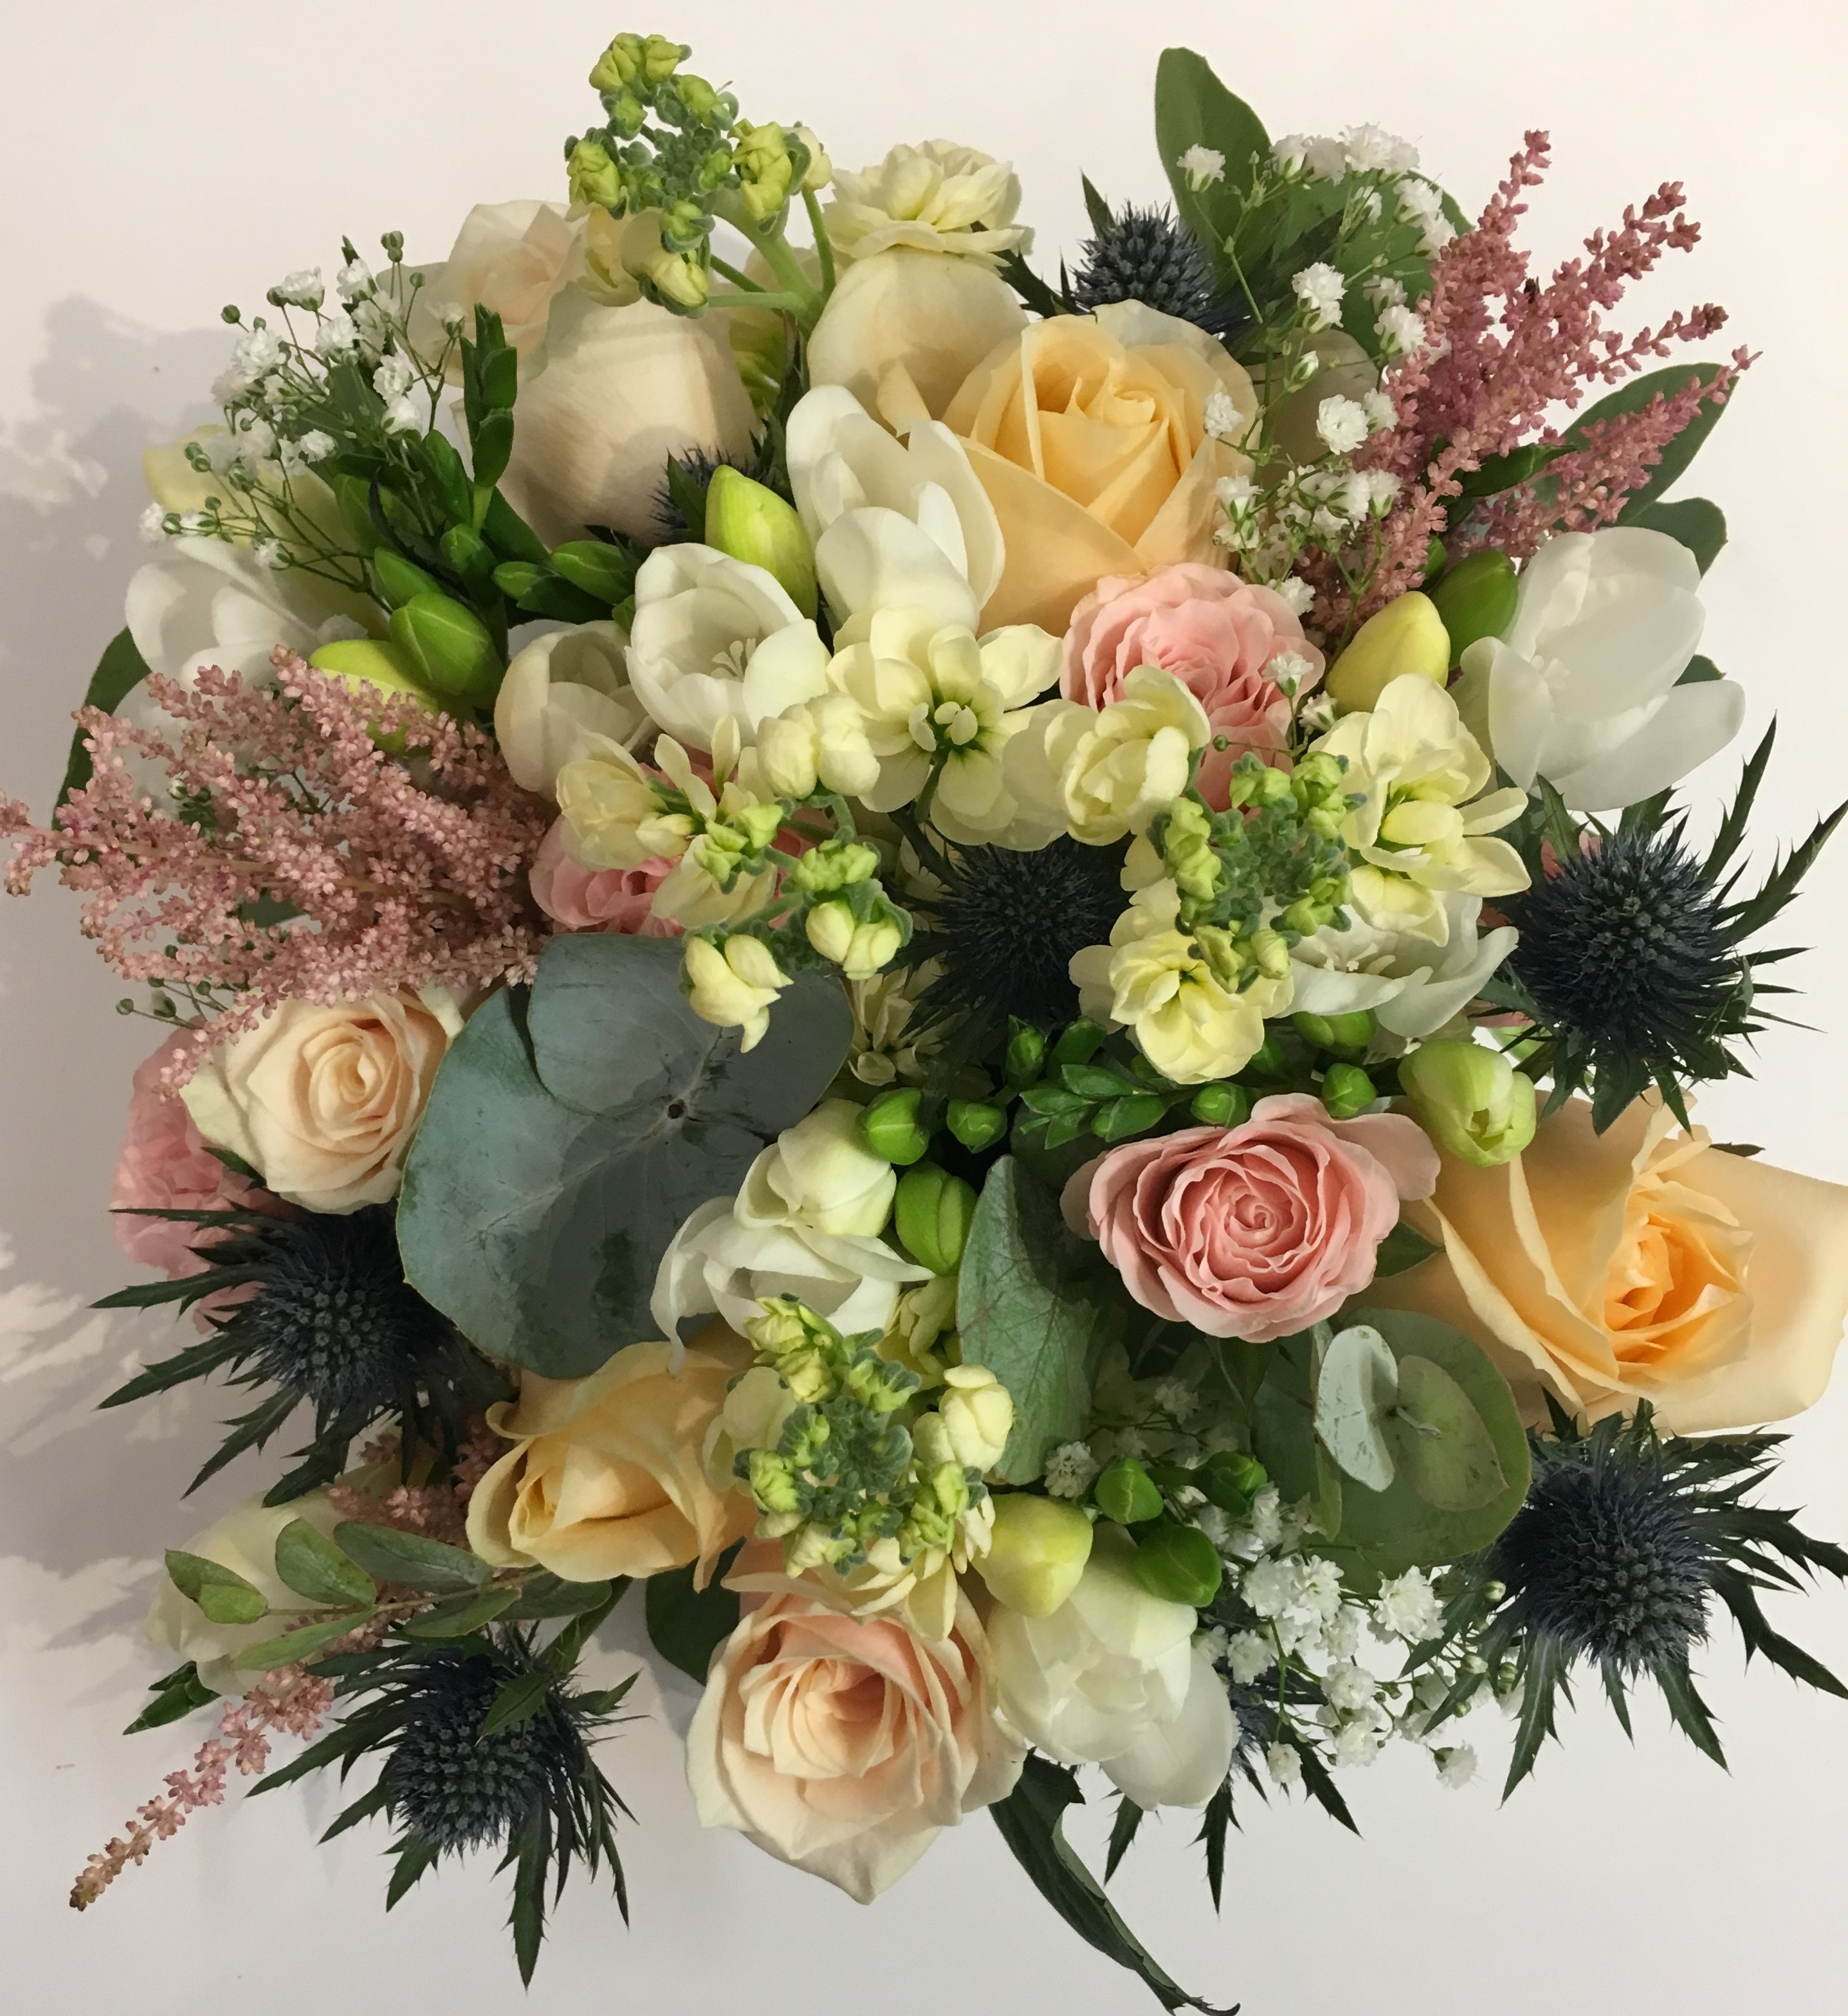 country style wedding flowers hand tied with peach roses and soft pinks